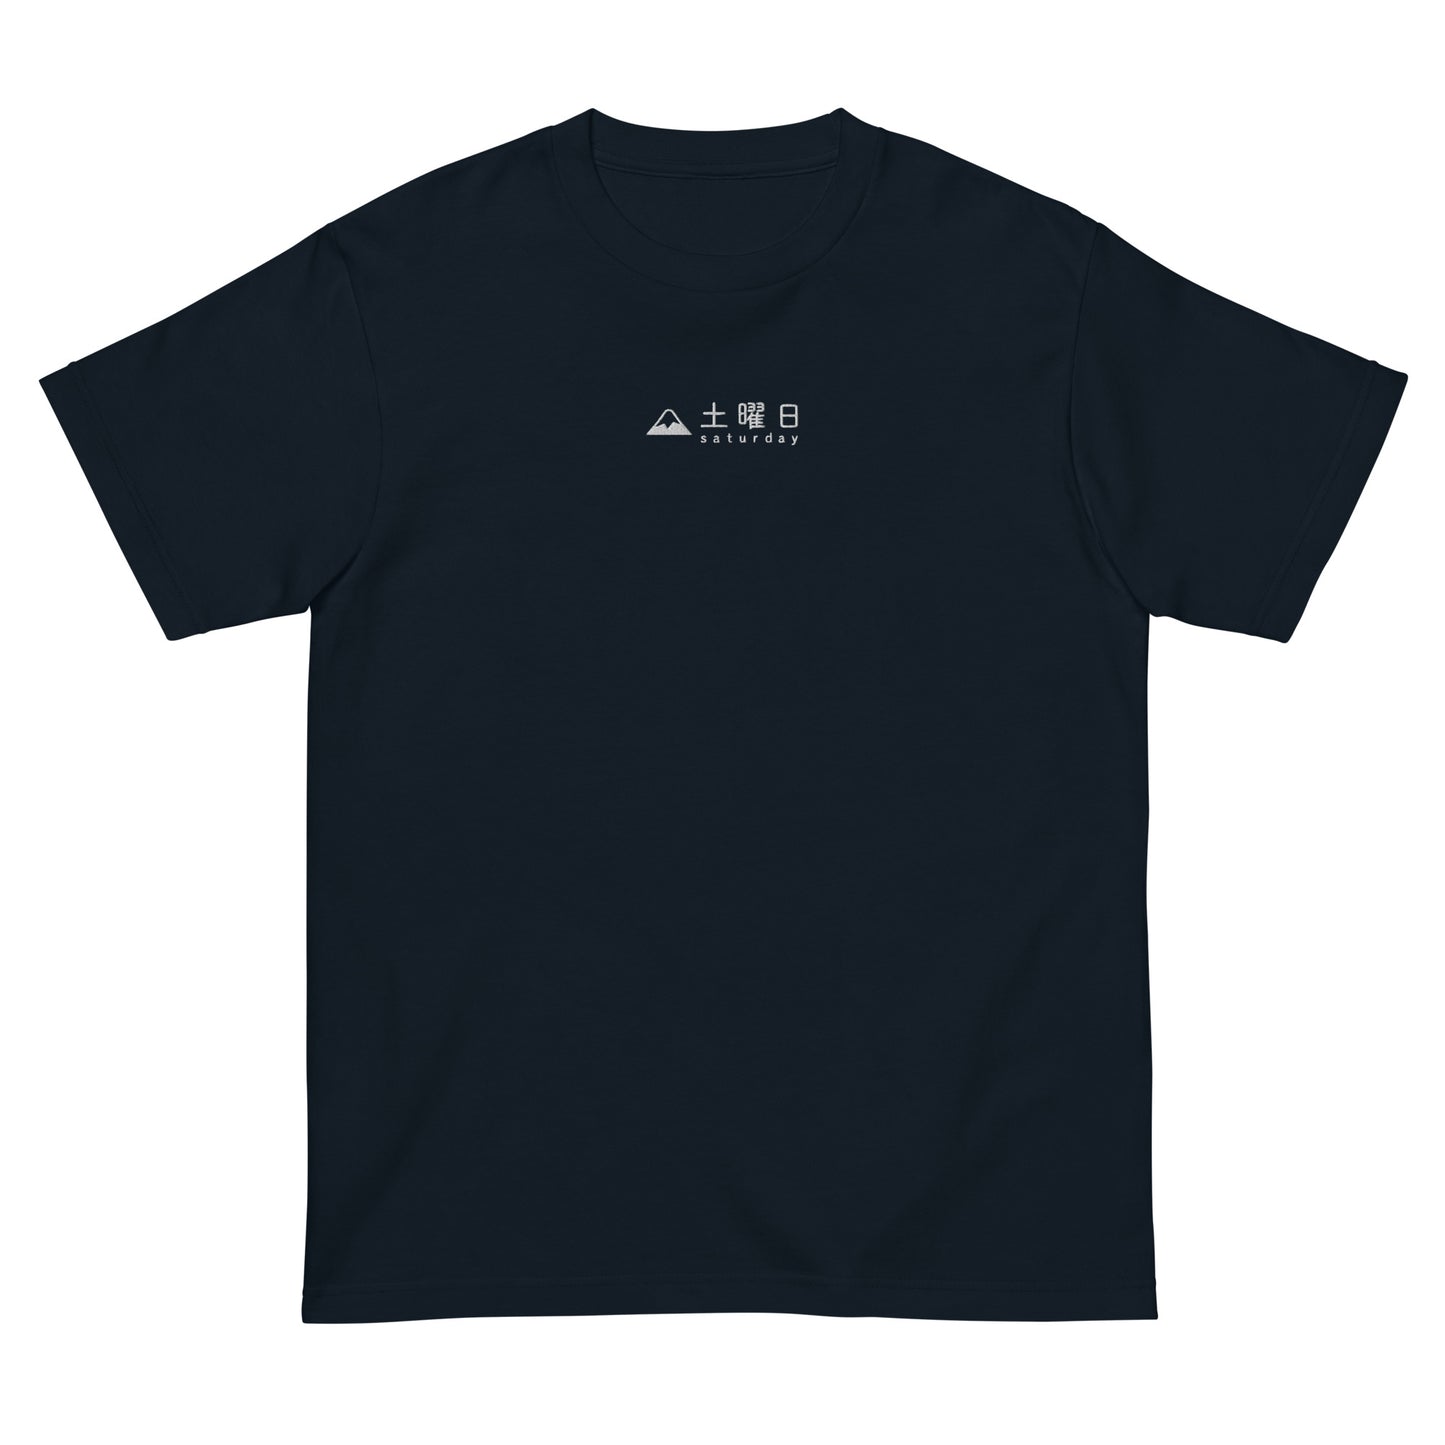 Navy High Quality Tee - Front Design with an Black Embroidery "Saturday" in Japanese and English